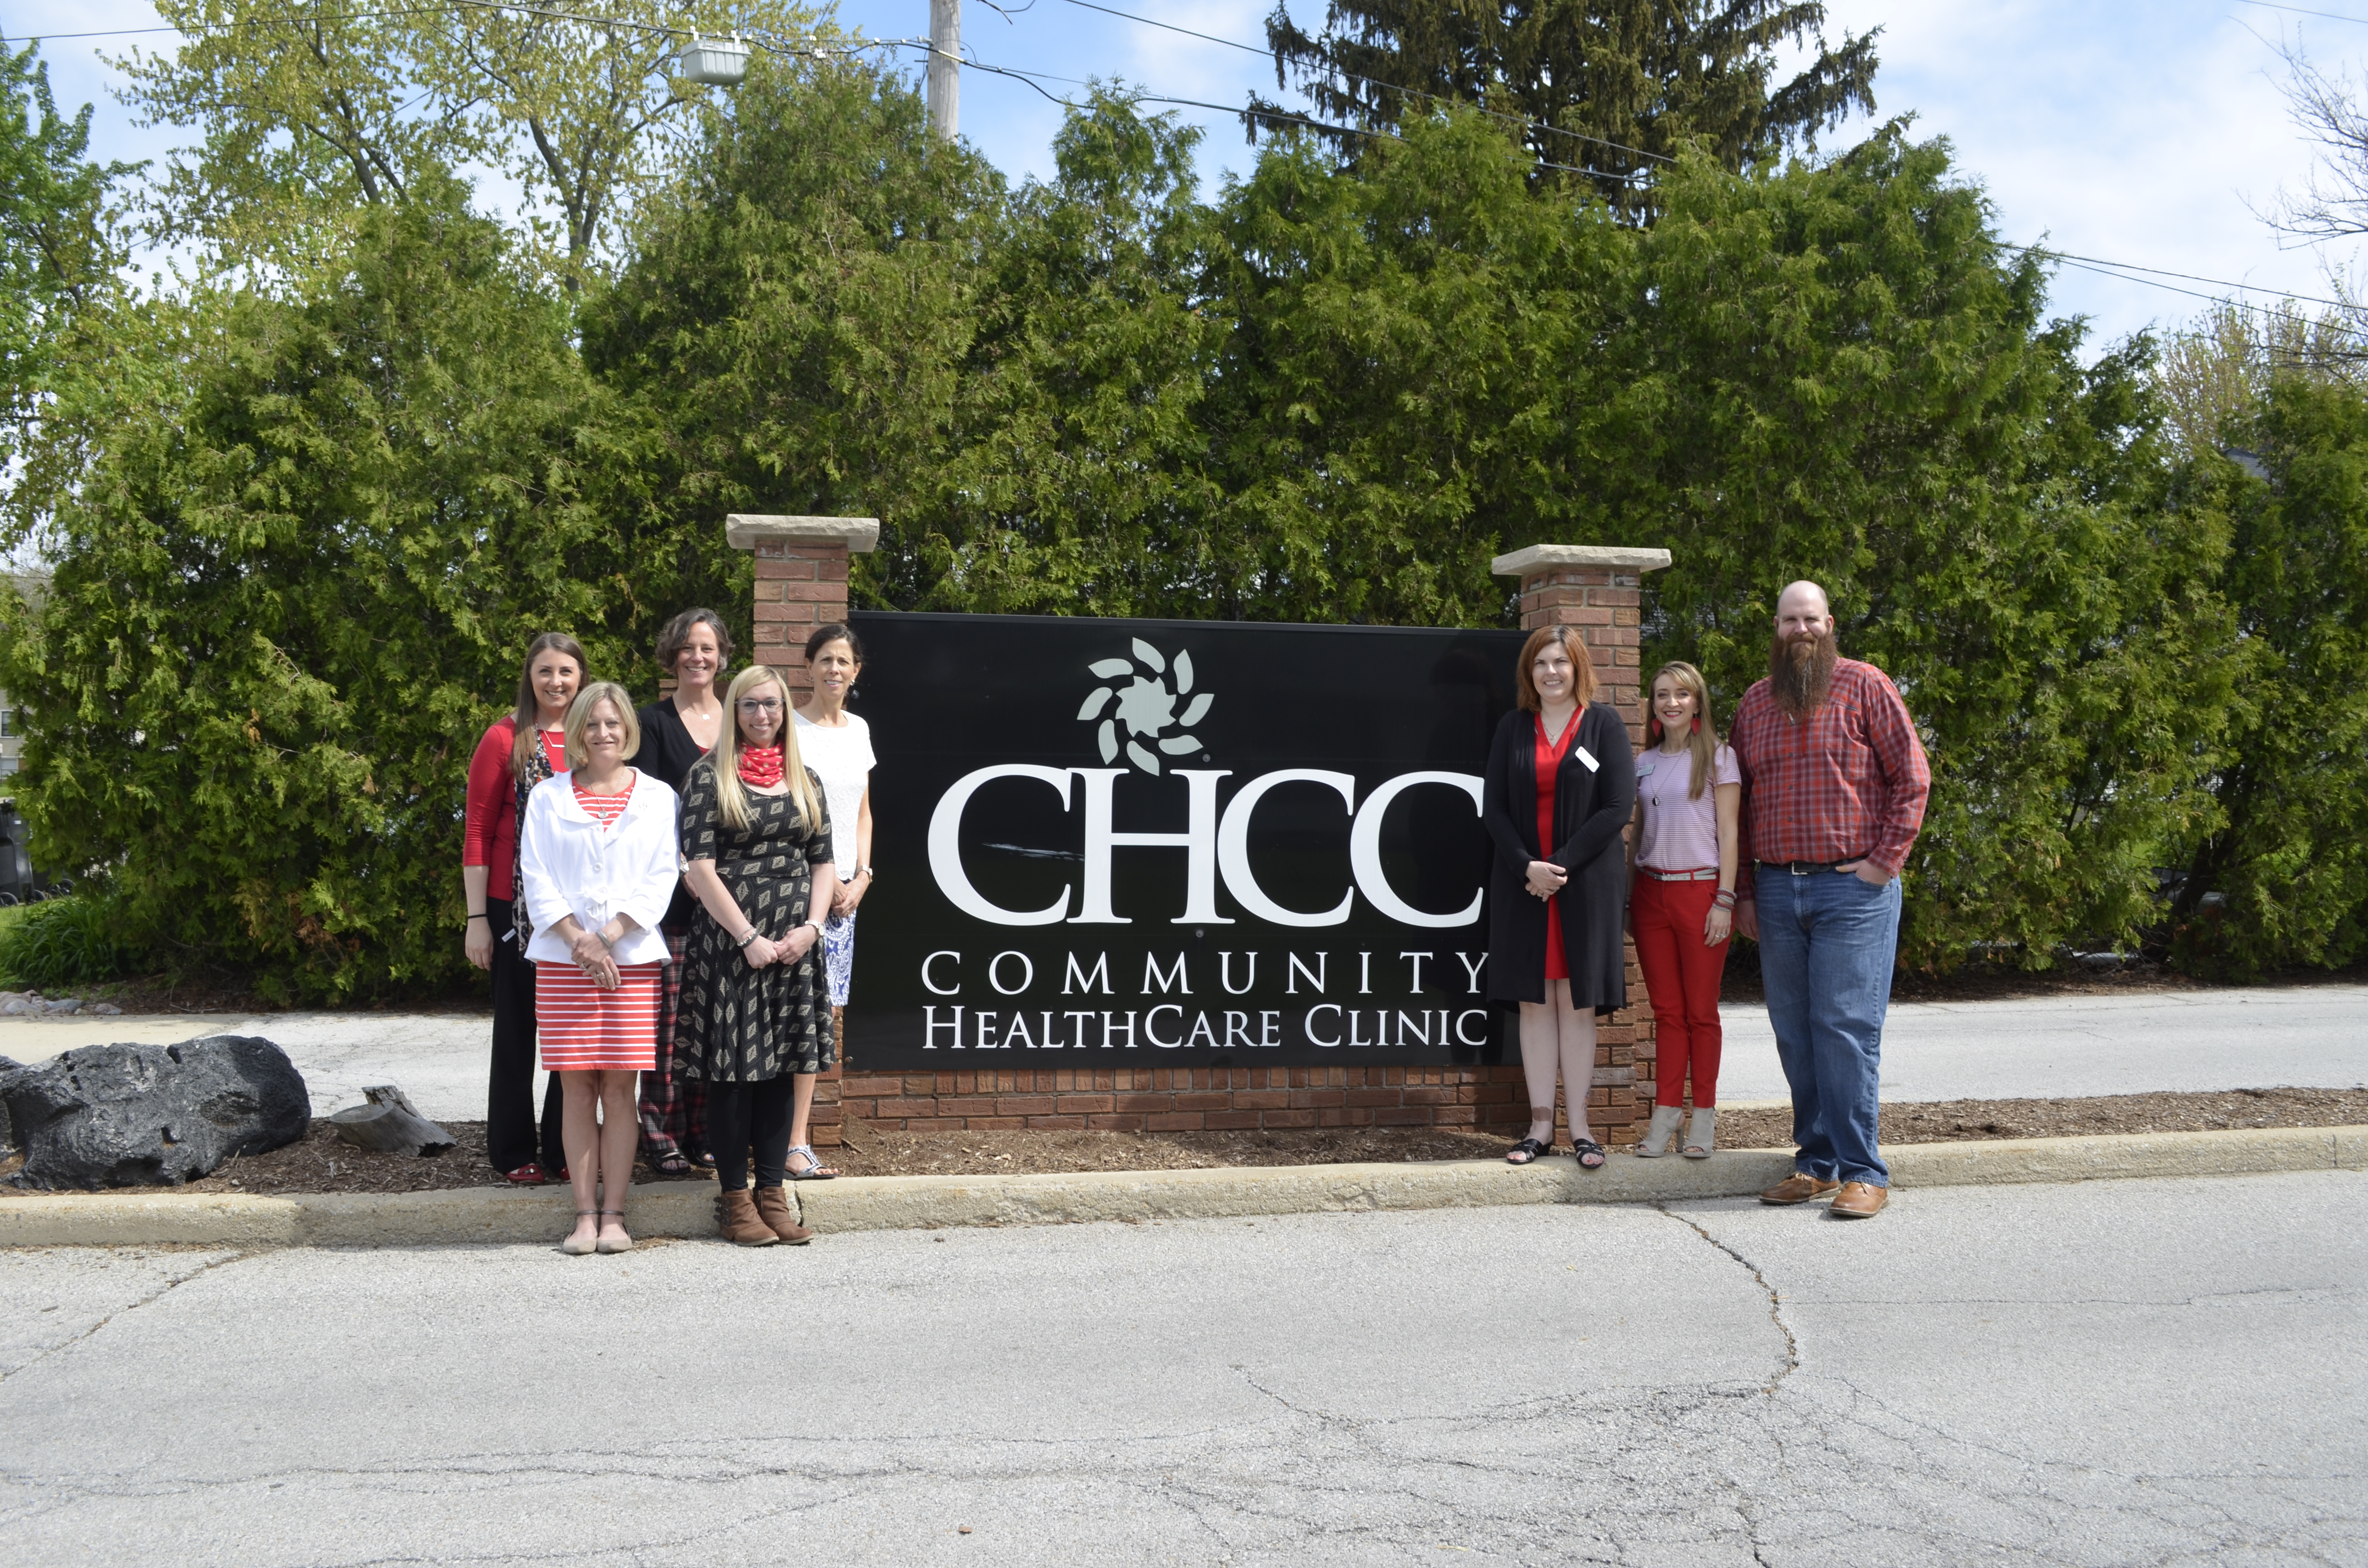 People standing next to CHCC sign